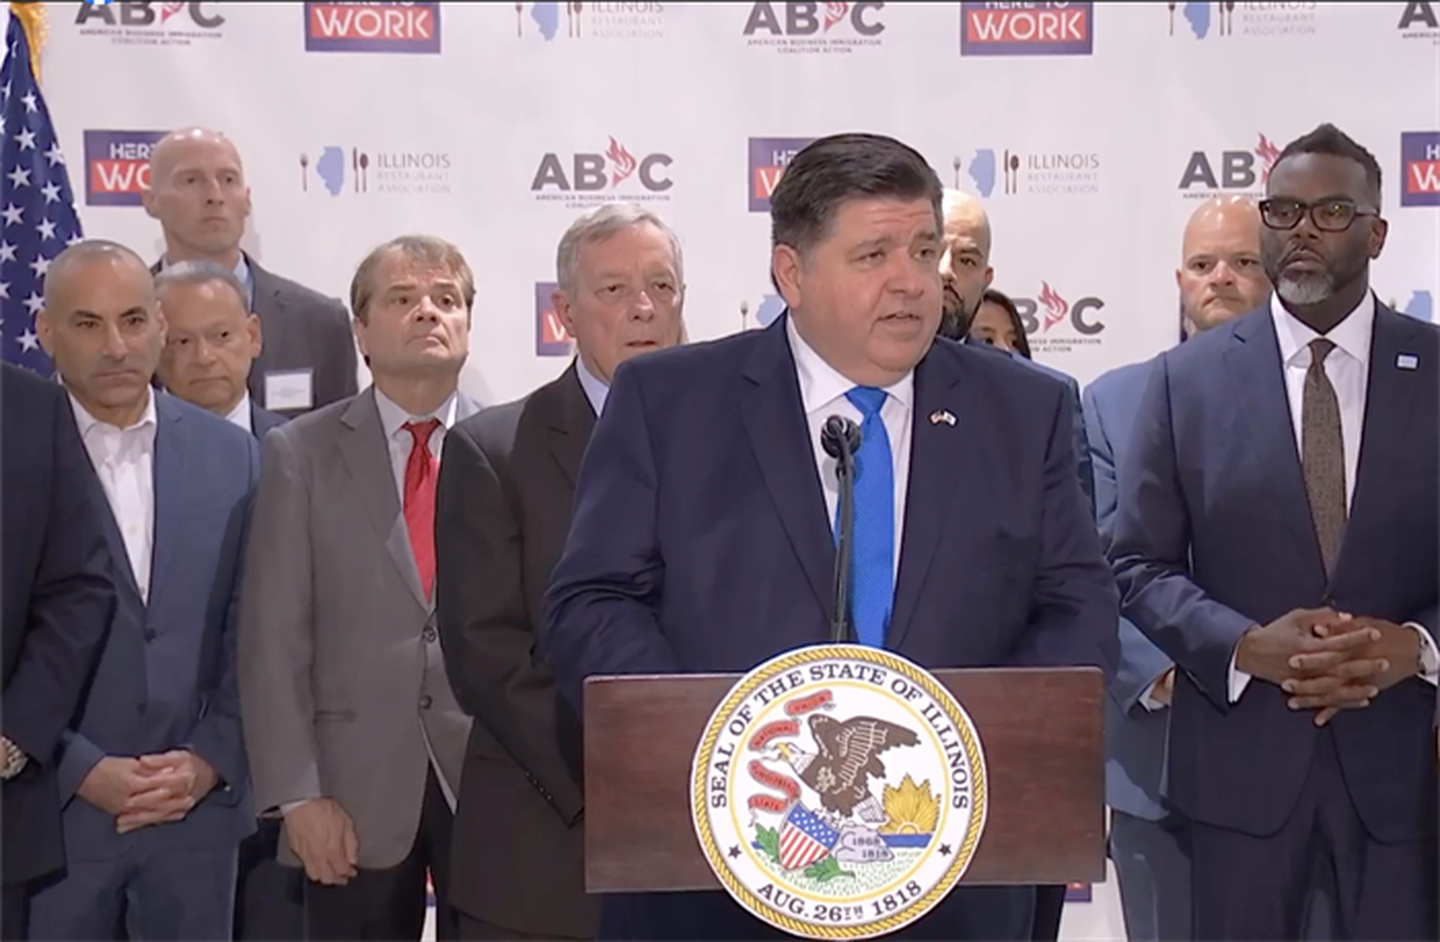 Gov. JB Pritzker at a Chicago news conference on Aug. 30, advocating for the U.S. Department of Homeland Security to allow Illinois and other states to sponsor work permits for asylum seekers and other long-term undocumented workers.